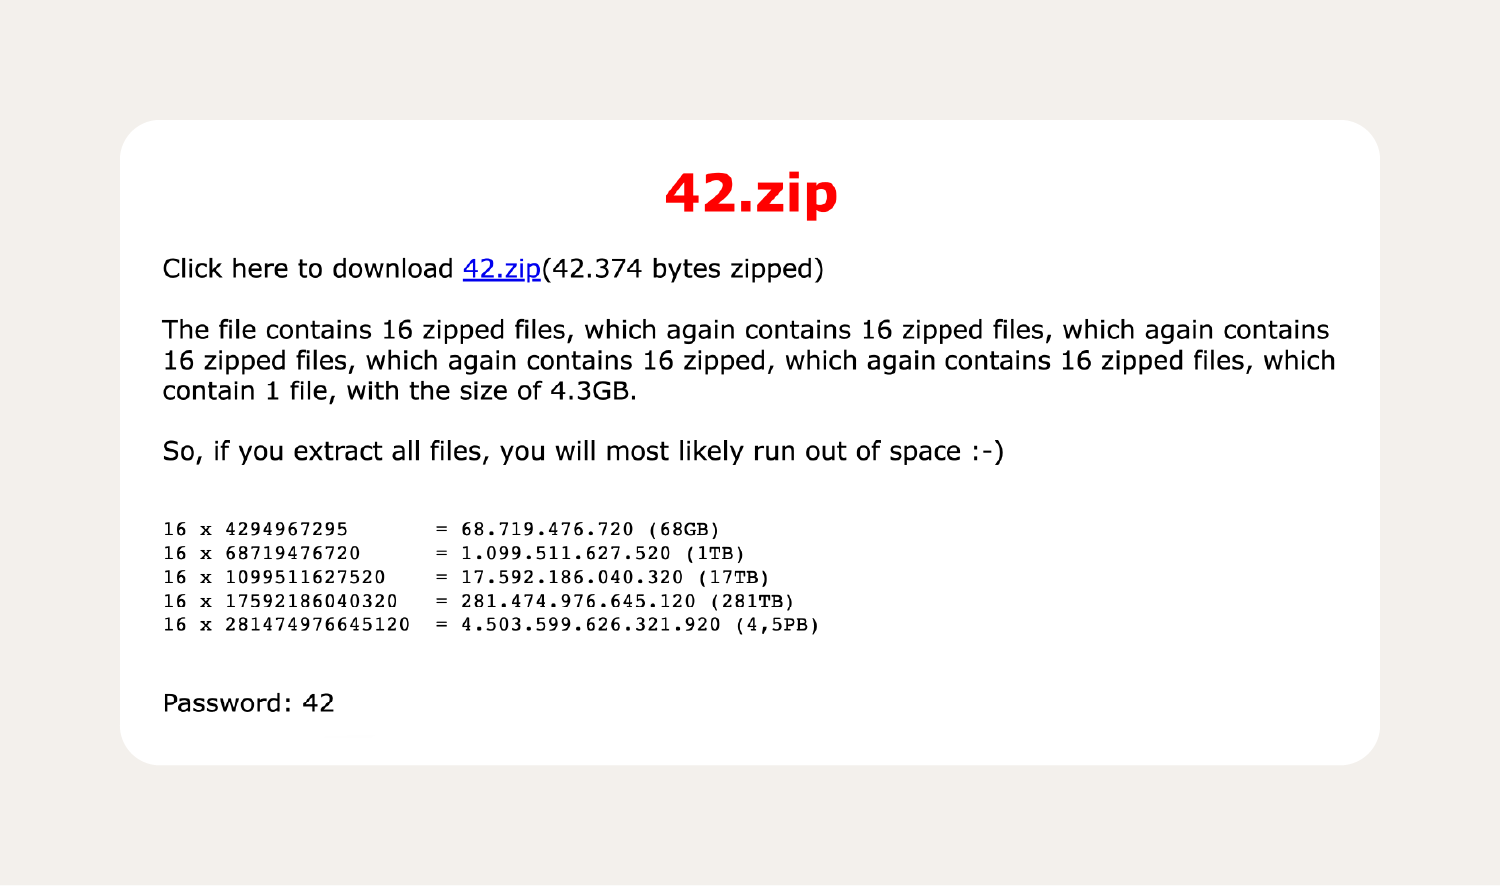 A large and well-known zip bomb example—42.zip.